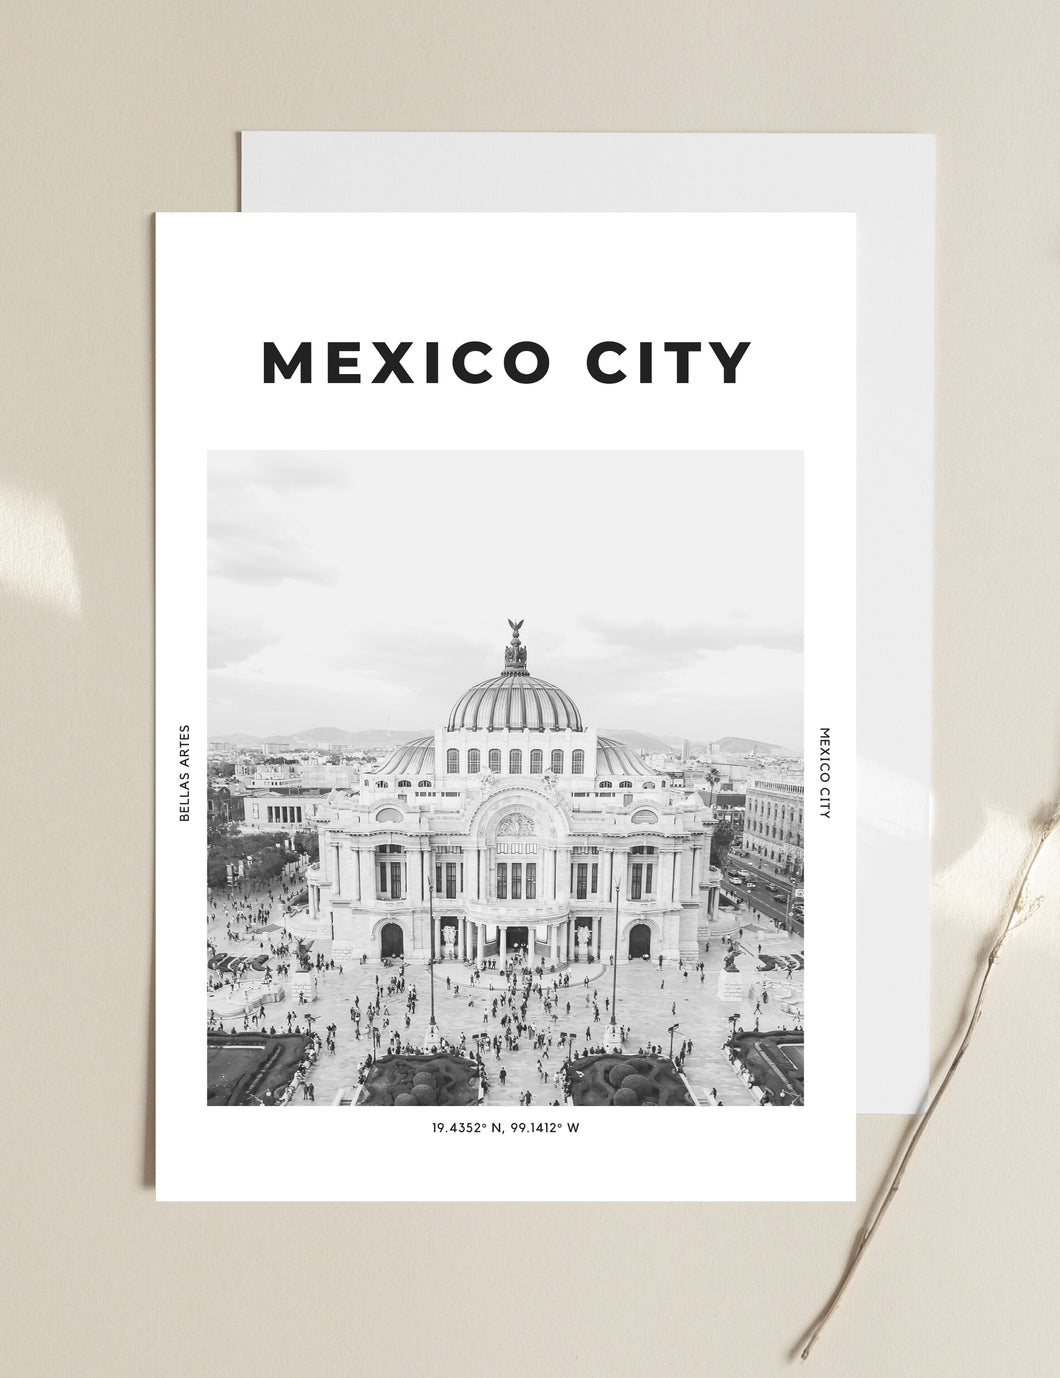 Mexico City 'Golden Opportunity' Print